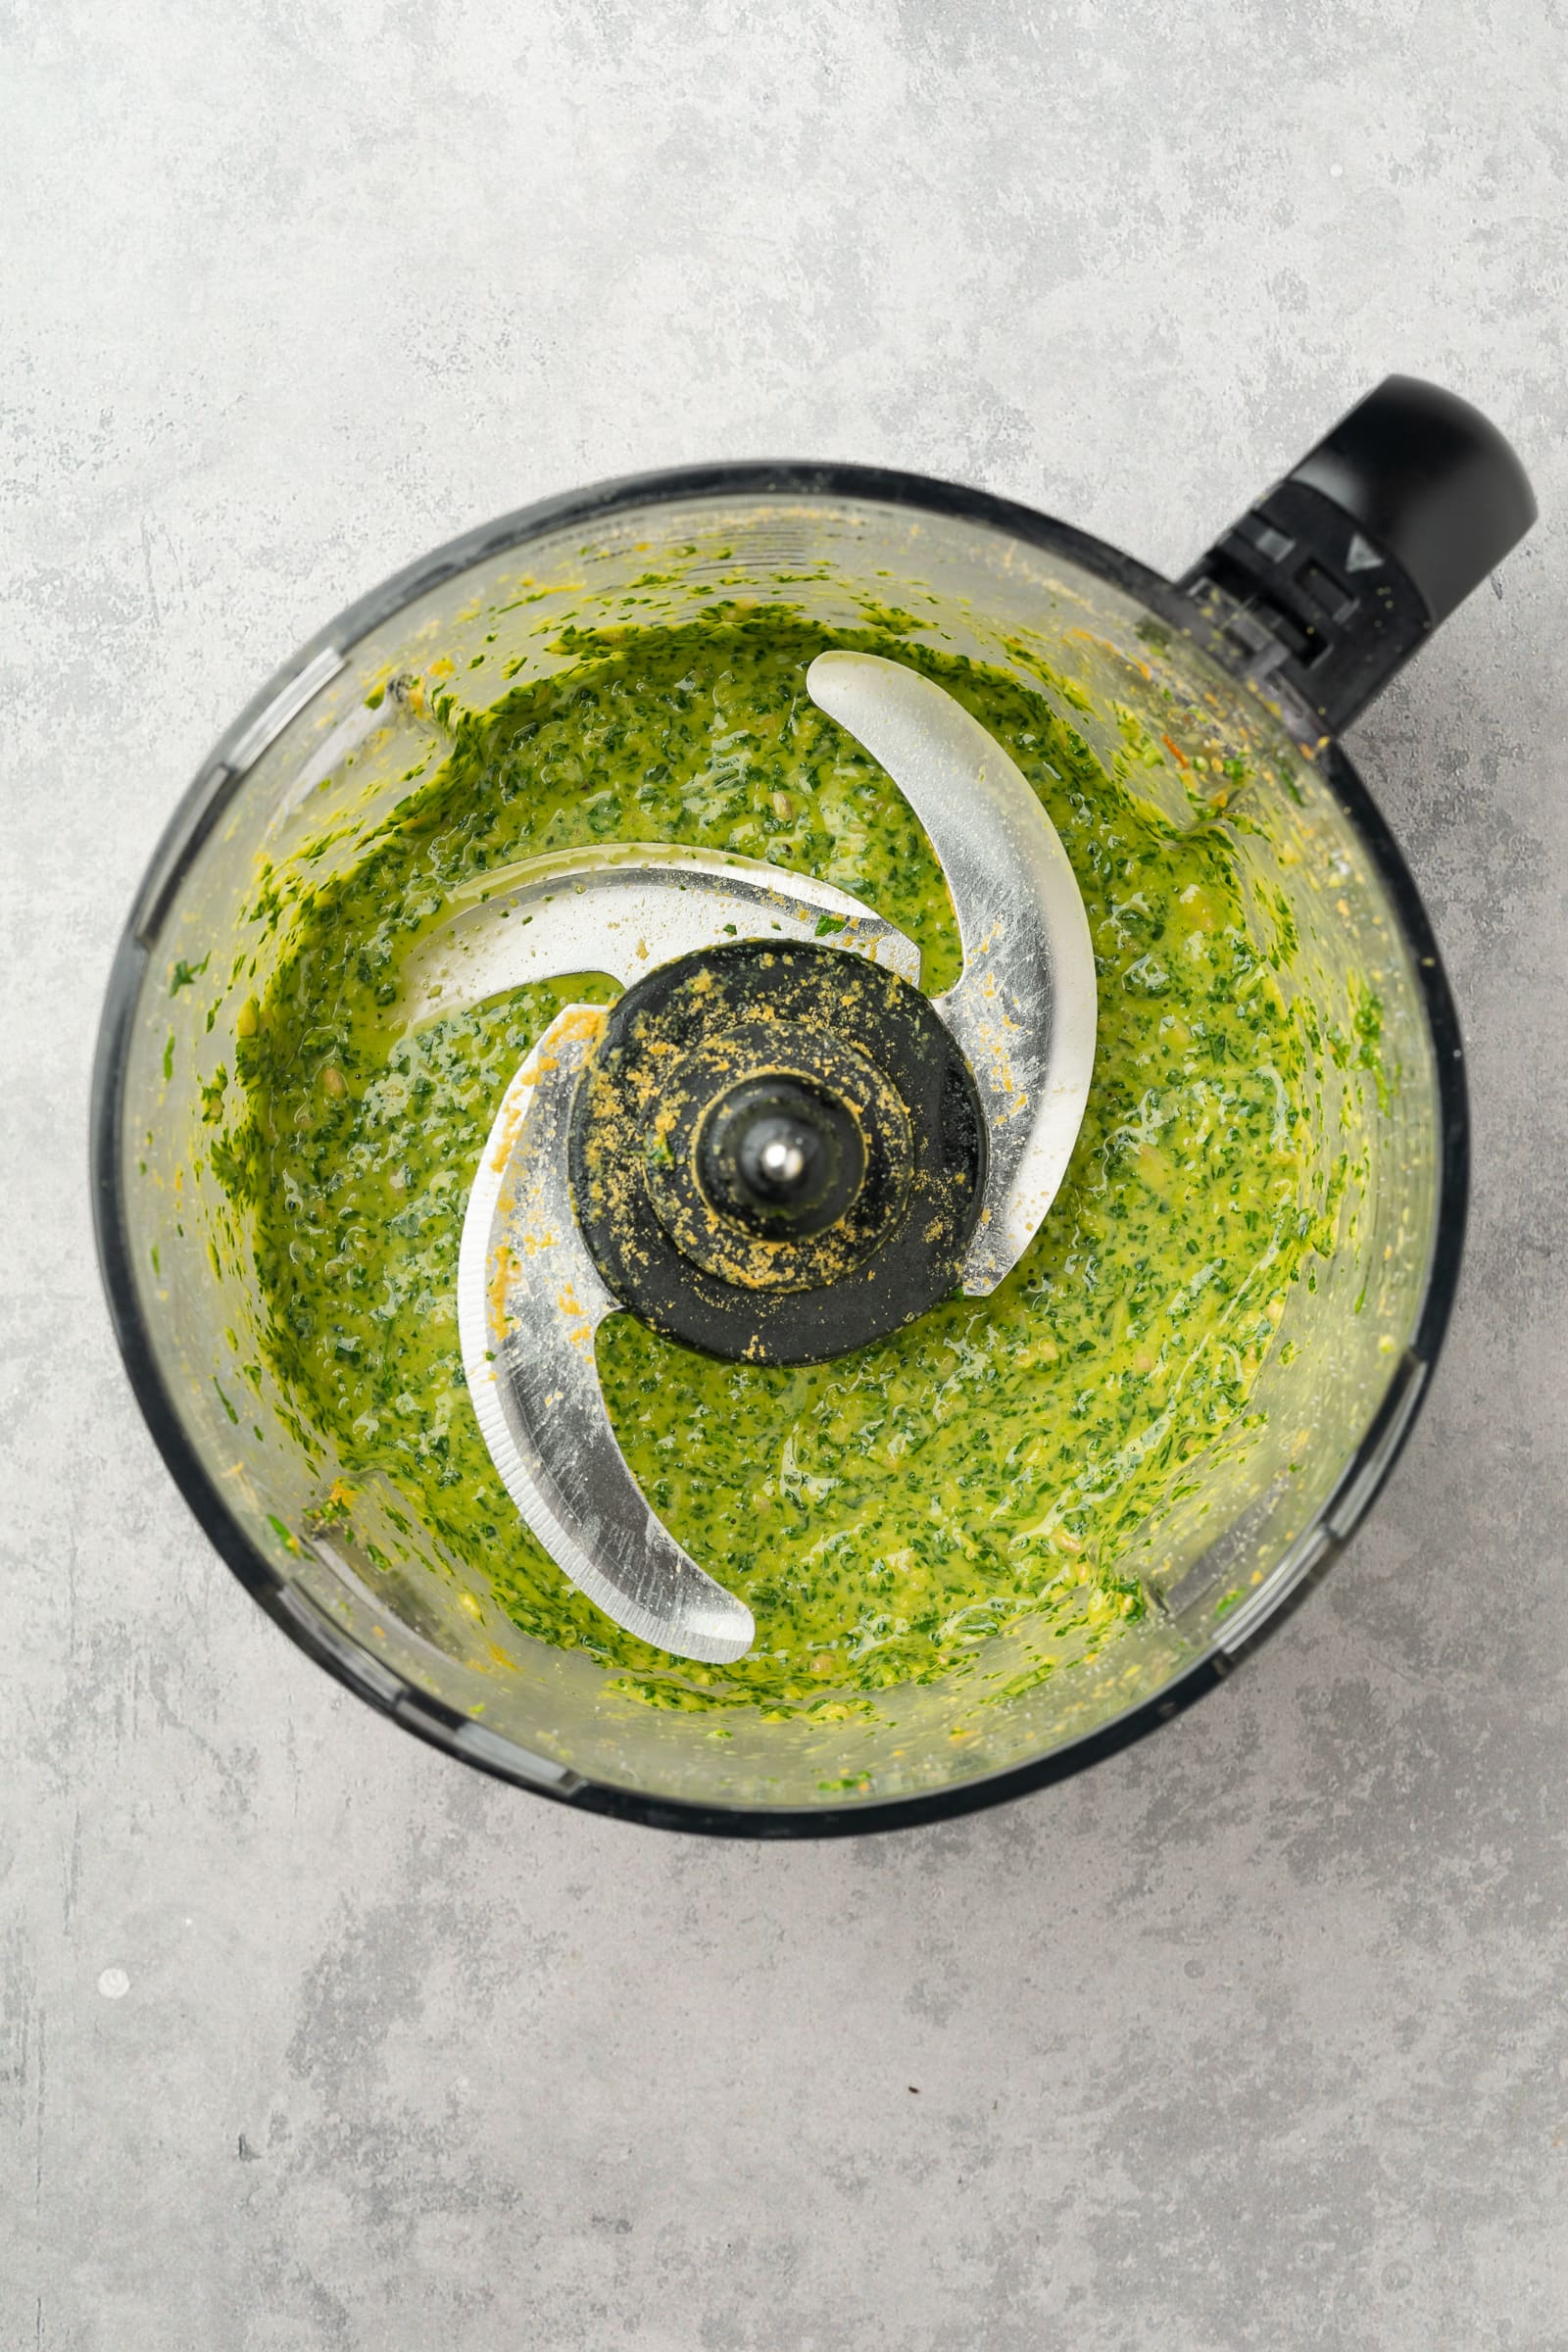 Ingredients for pesto in a food processor after processing.